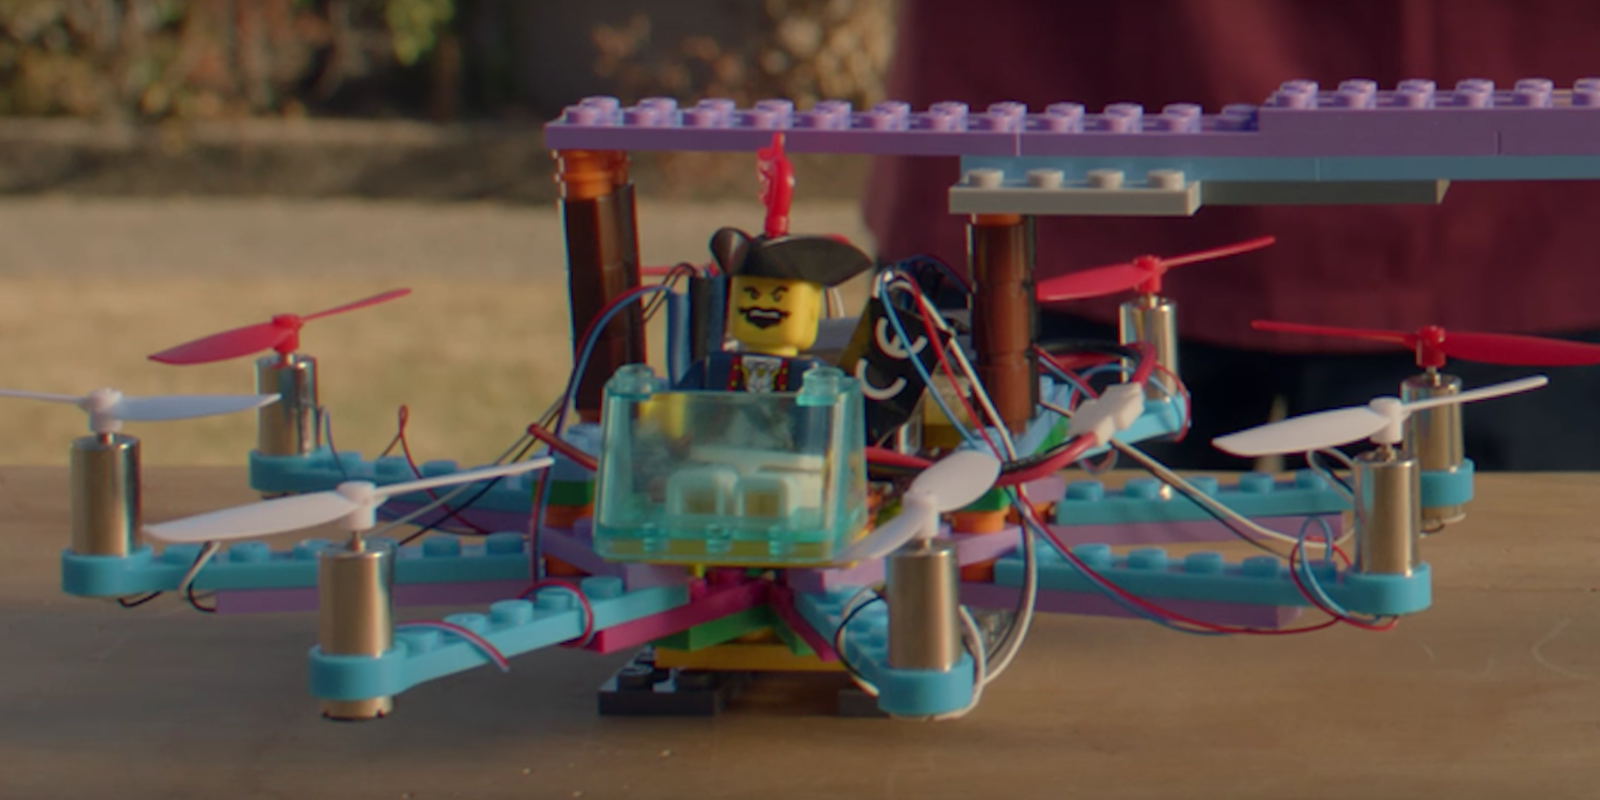 This dude took his Tinder match on a date to build a LEGO drone